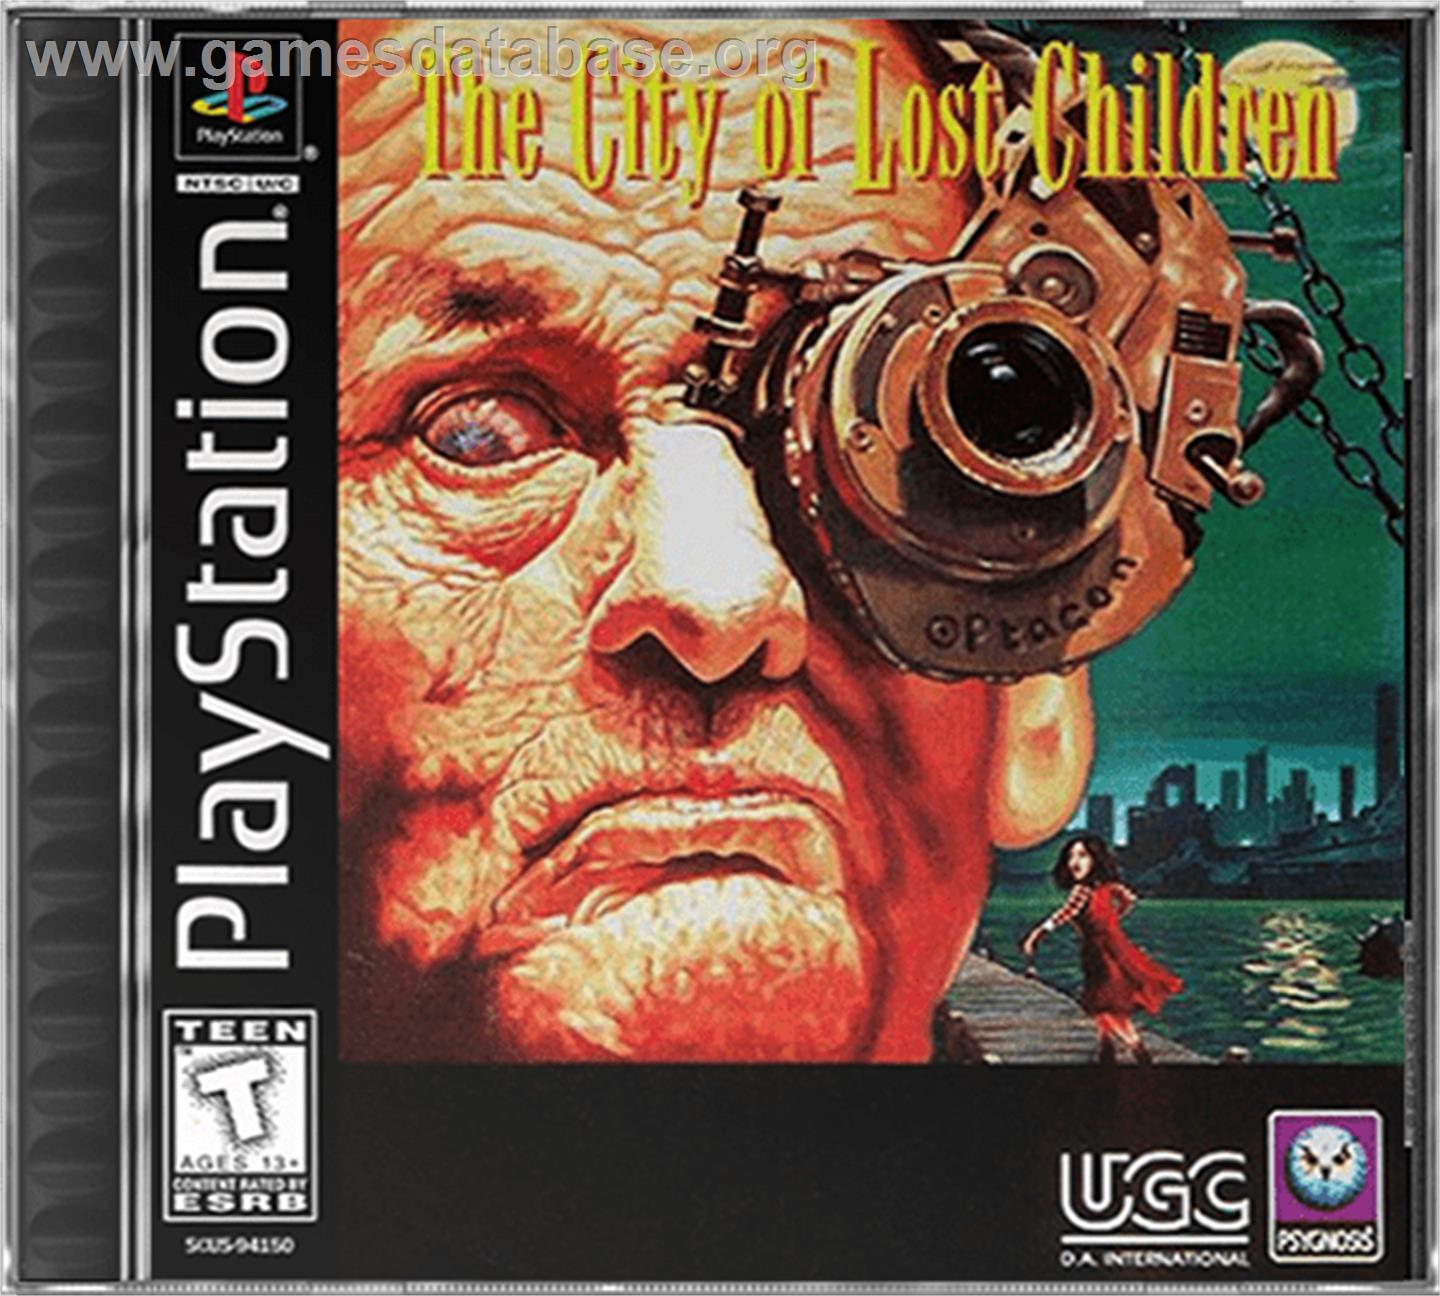 The City of Lost Children - Sony Playstation - Artwork - Box